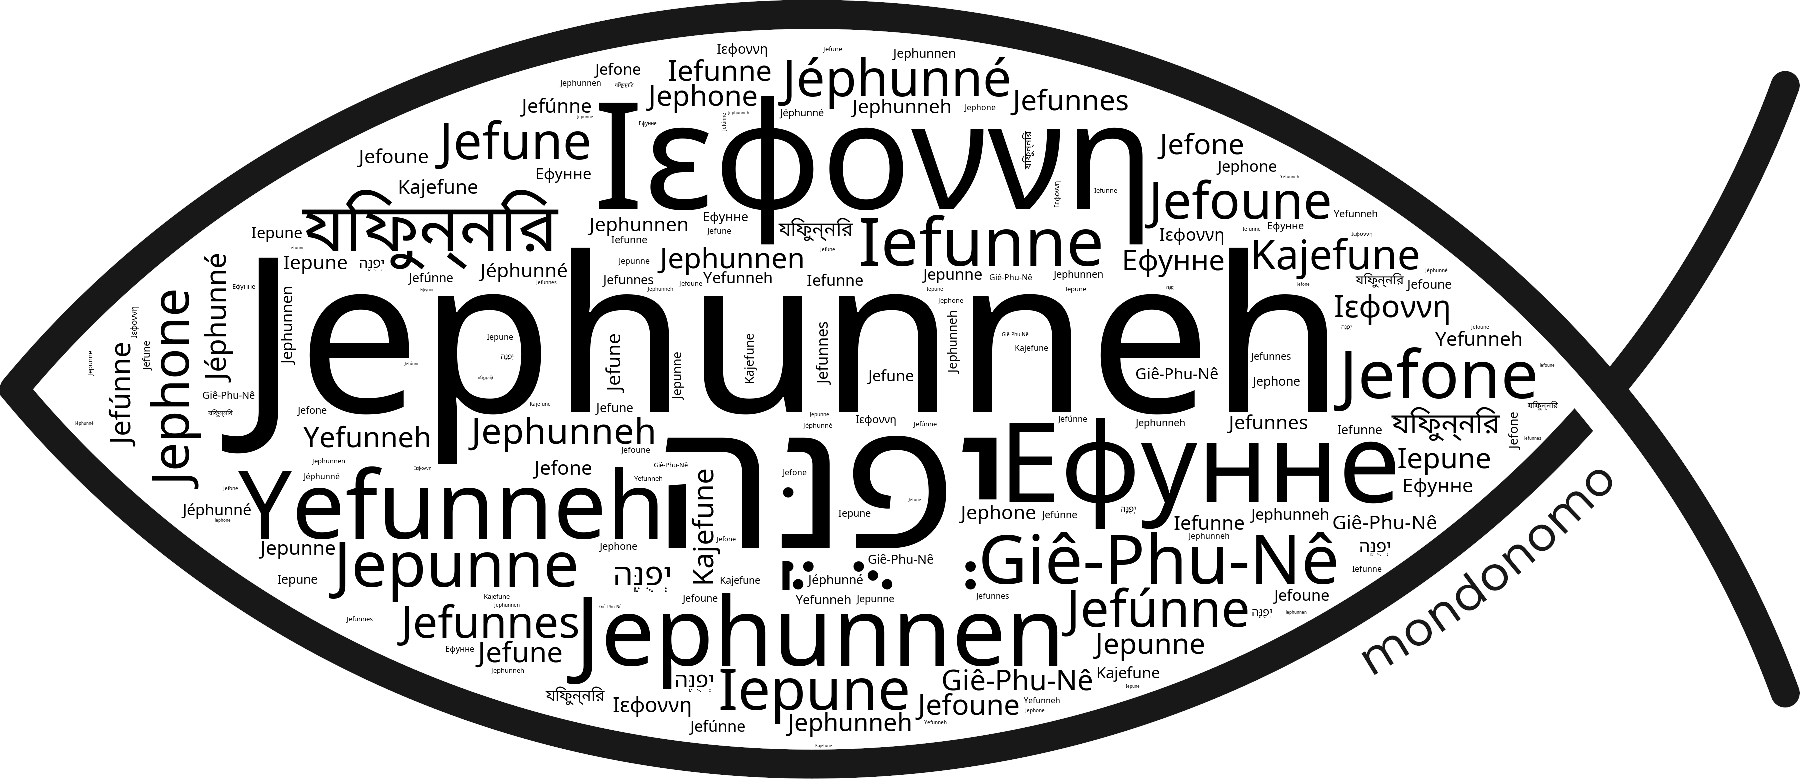 Name Jephunneh in the world's Bibles